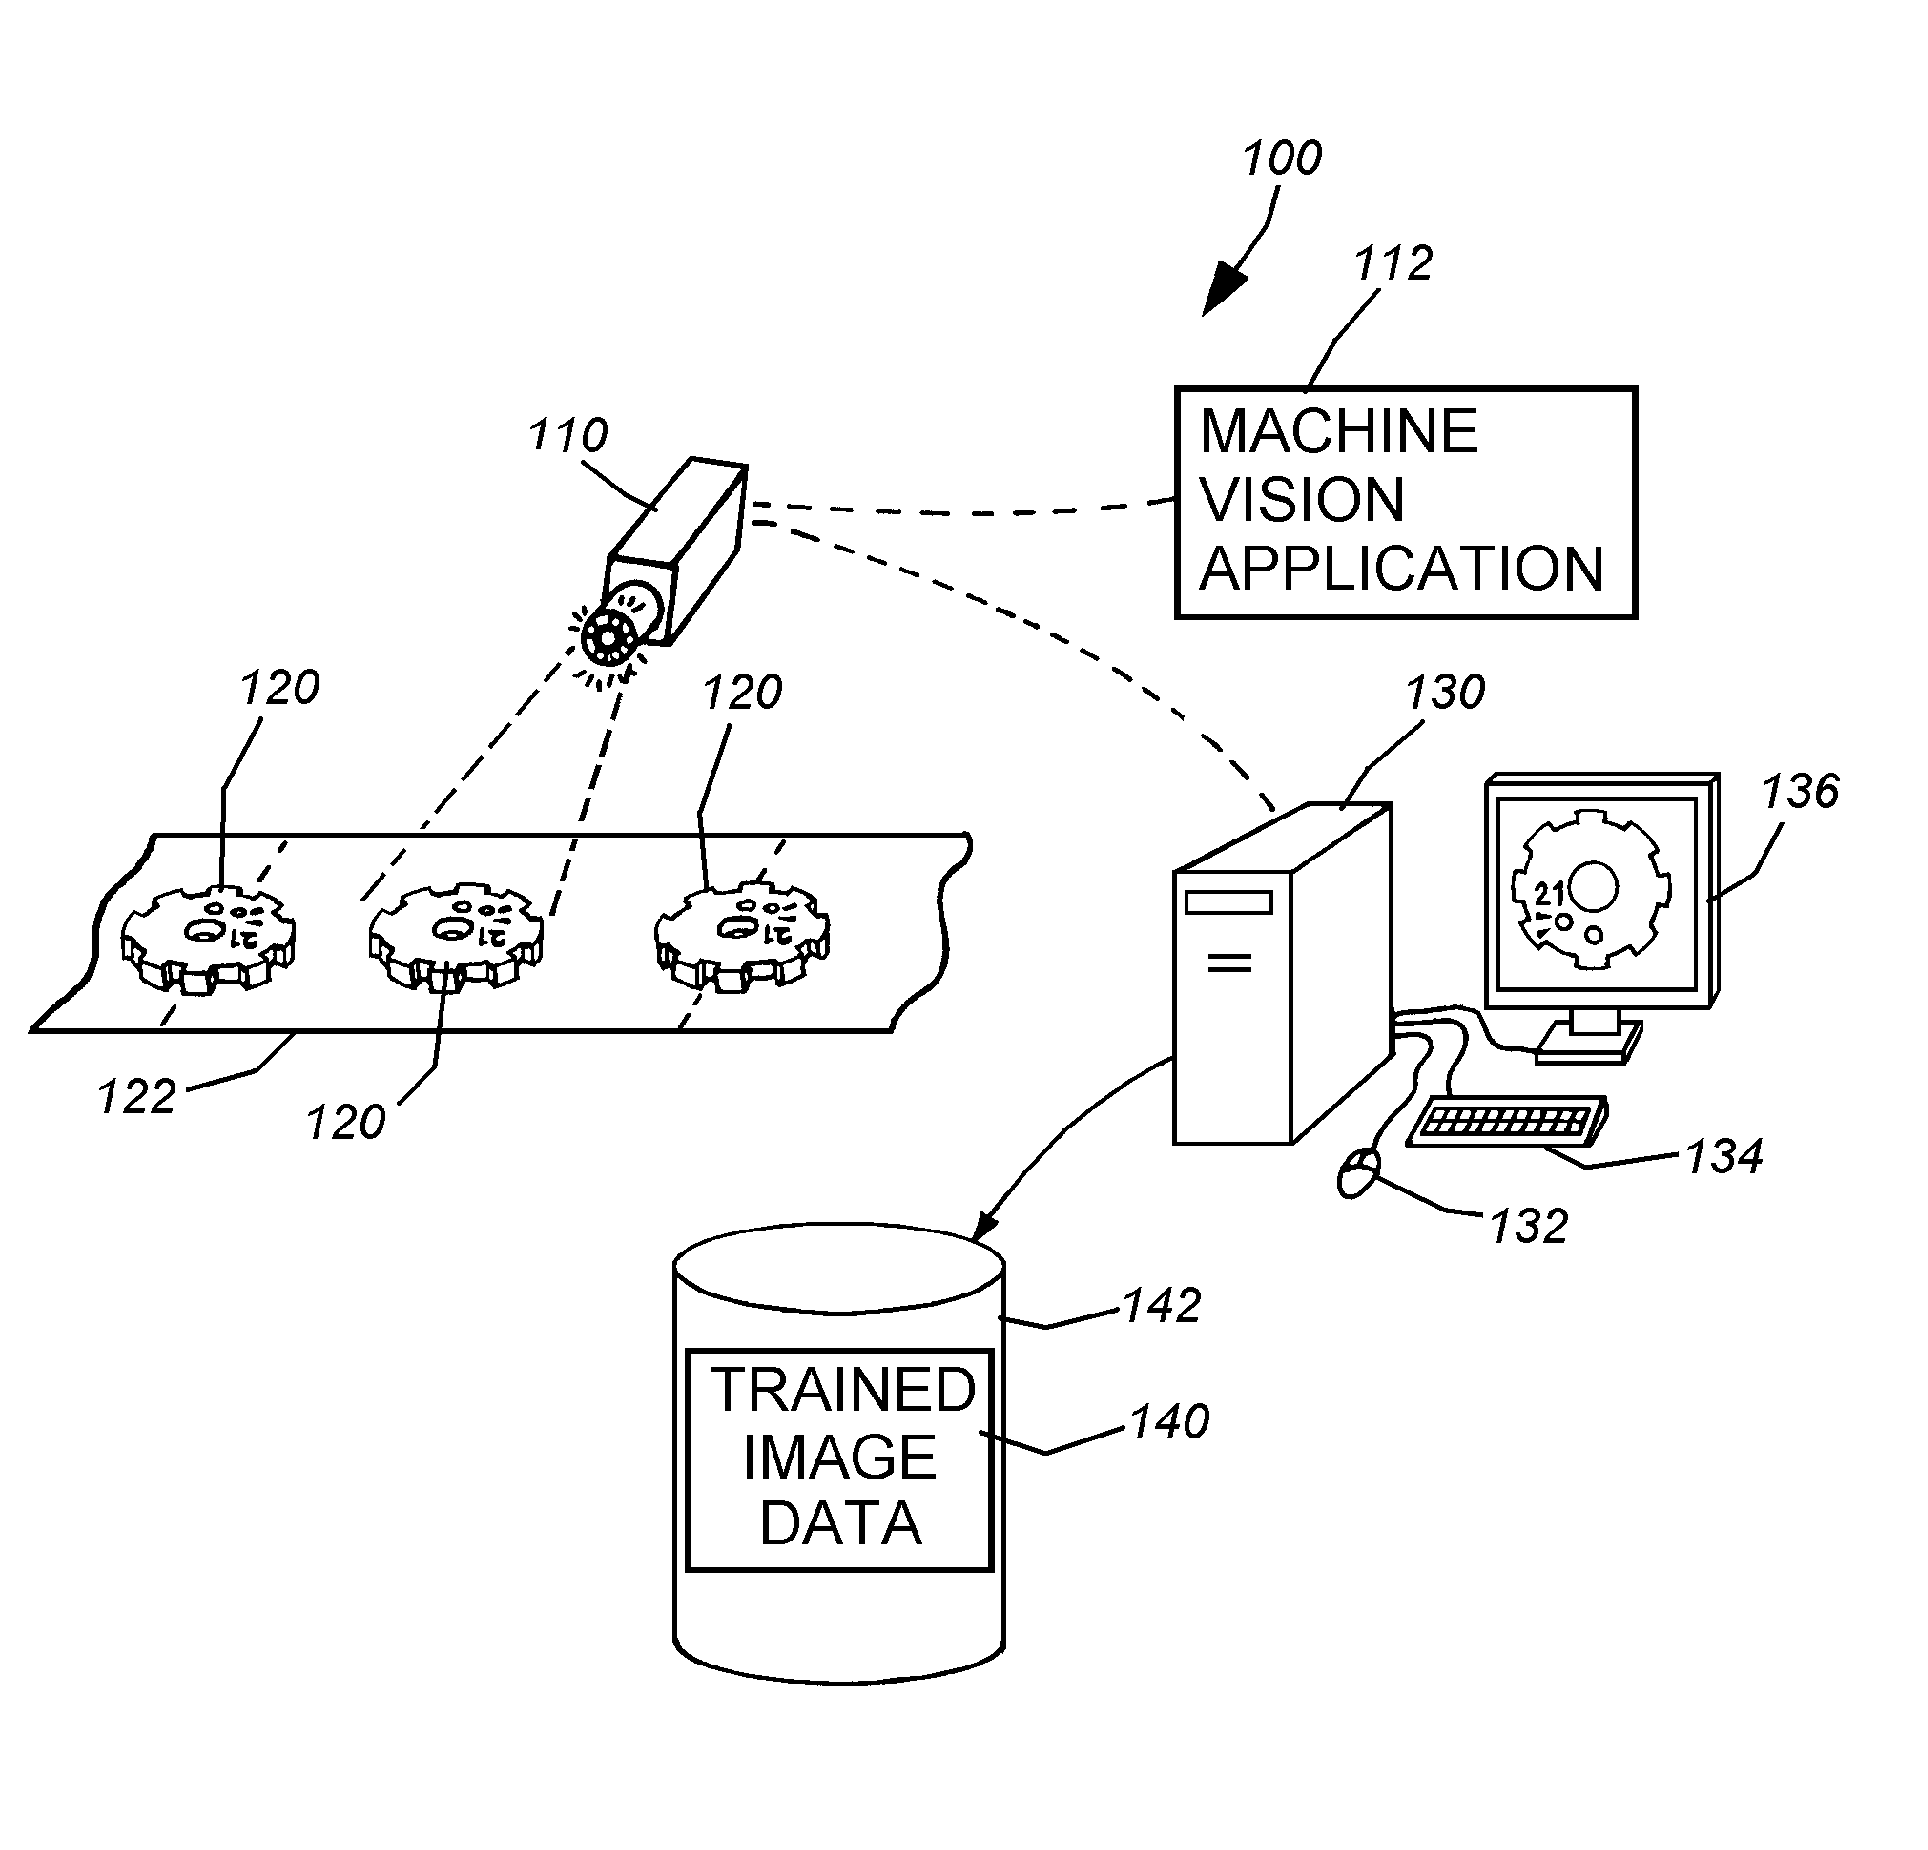 System and method for detecting flaws in objects using machine vision